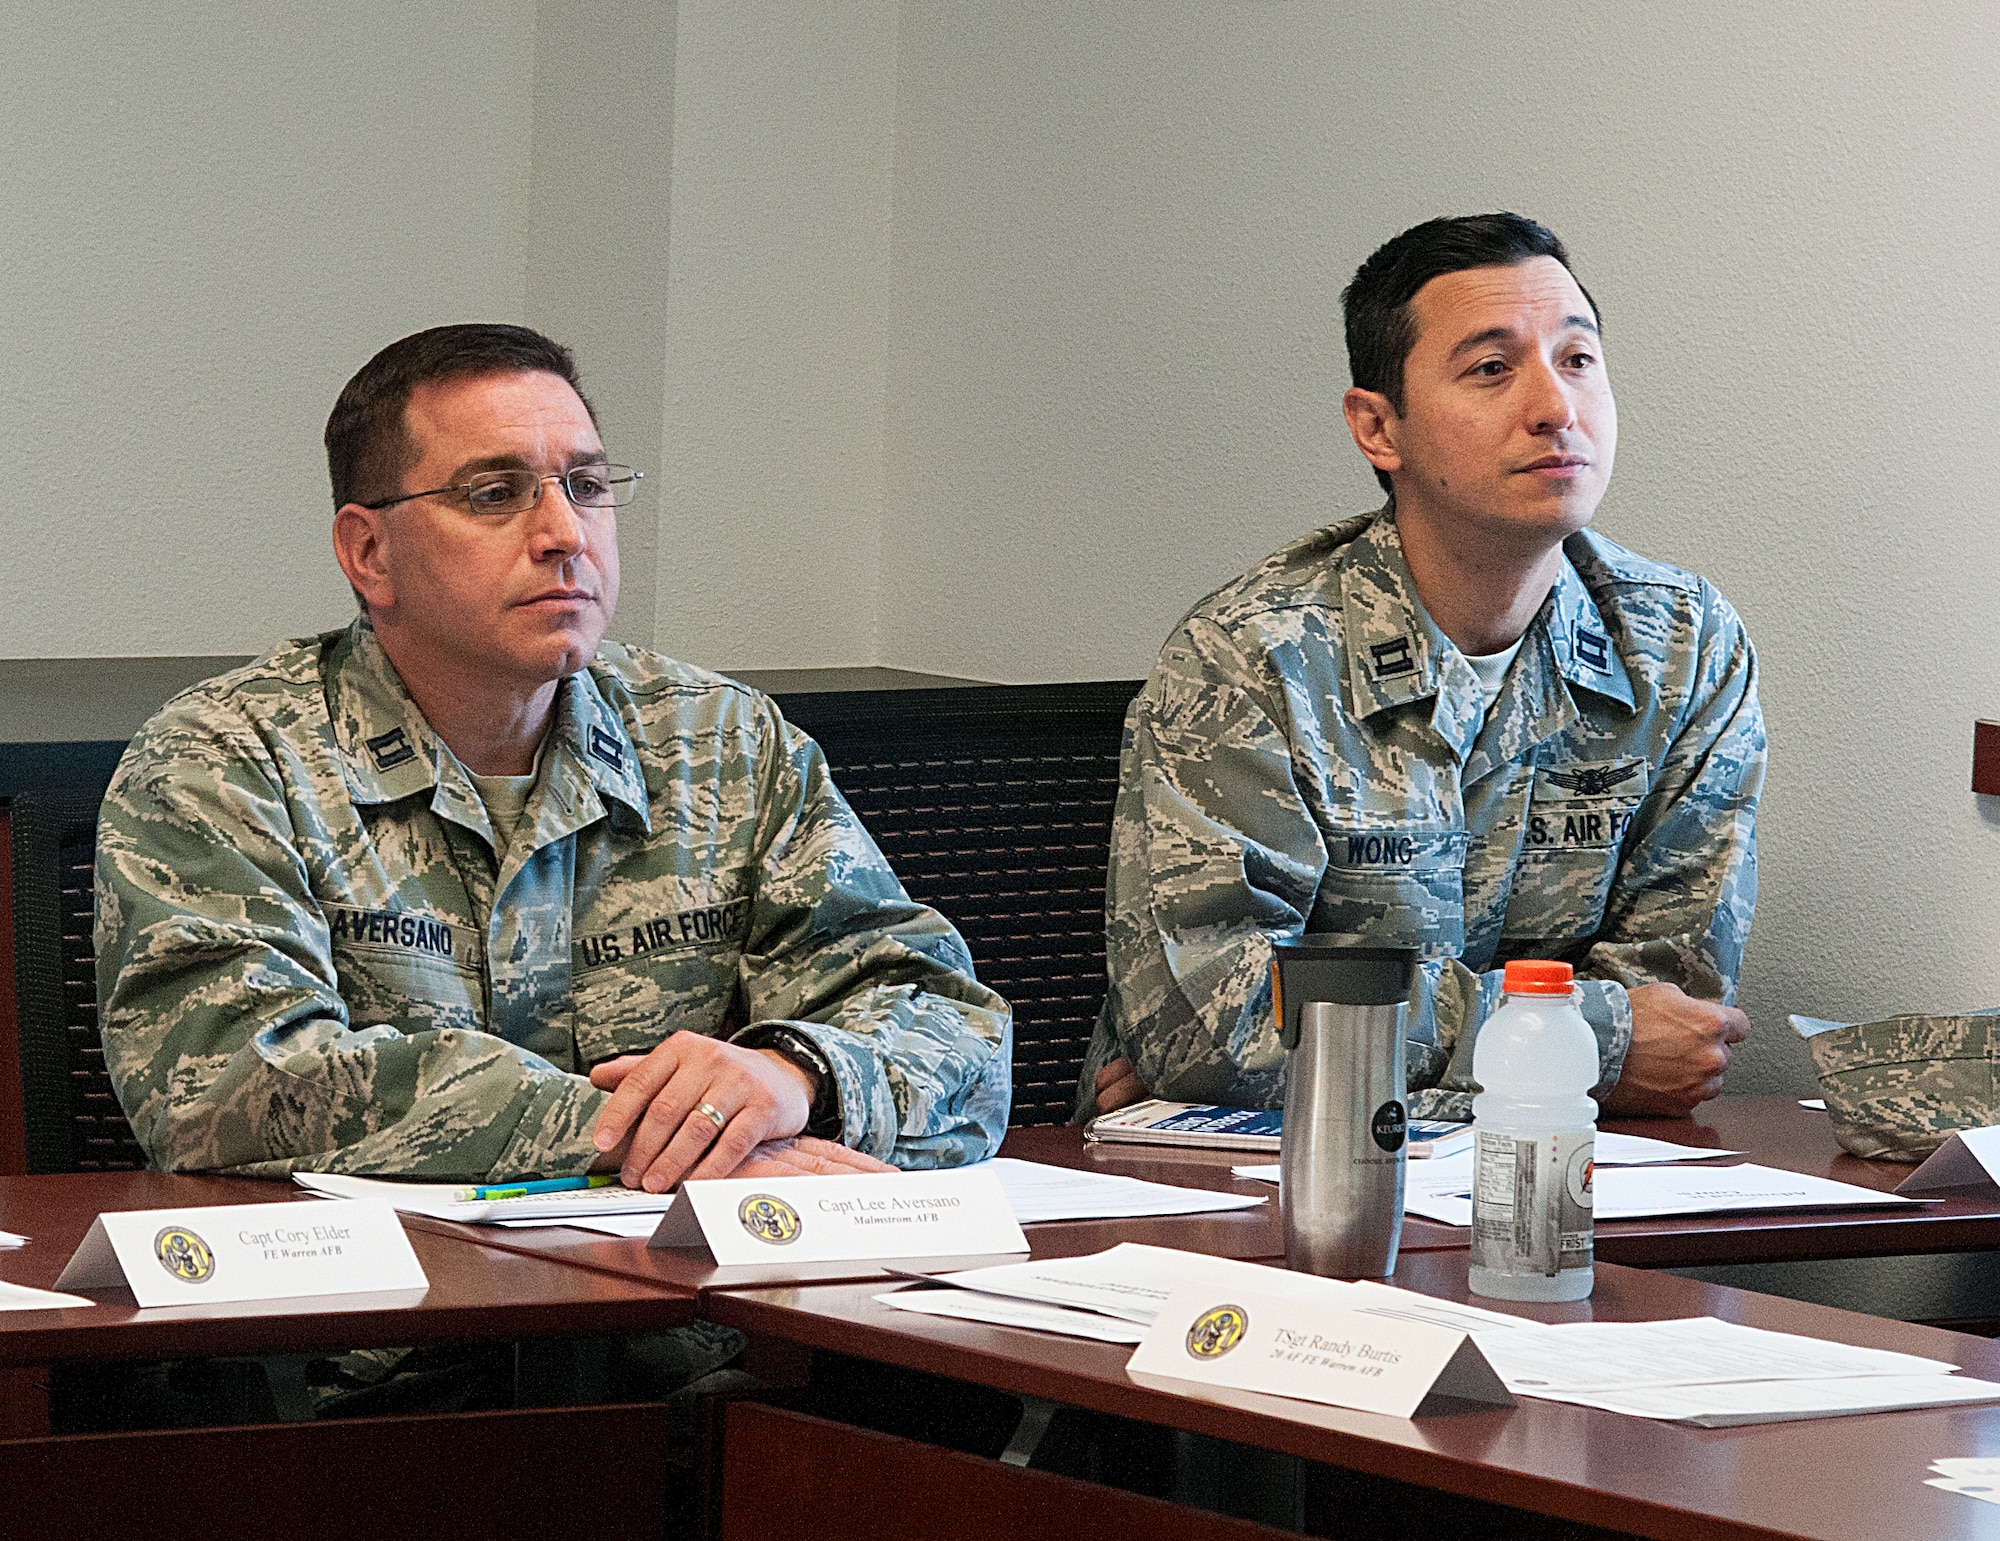 Captain Lee Aversano, 10th Missile Squadron instructor, Malmstrom Air Force Base, Mont., and Capt. Armand Wong, 532nd Training Squadron instructor, Vandenberg Air Force Base, Calif., listen to a briefing during the Advanced ICBM Course June 8, 2015, in the 20th Air Force ICBM Center of Excellence, F.E. Warren Air Force Base, Wyo. Airmen from missile, maintenance and security forces career fields, attended the course to obtain more in-depth knowledge of the nuclear deterrence mission. (U.S. Air Force photo by Senior Airman Jason Wiese)
